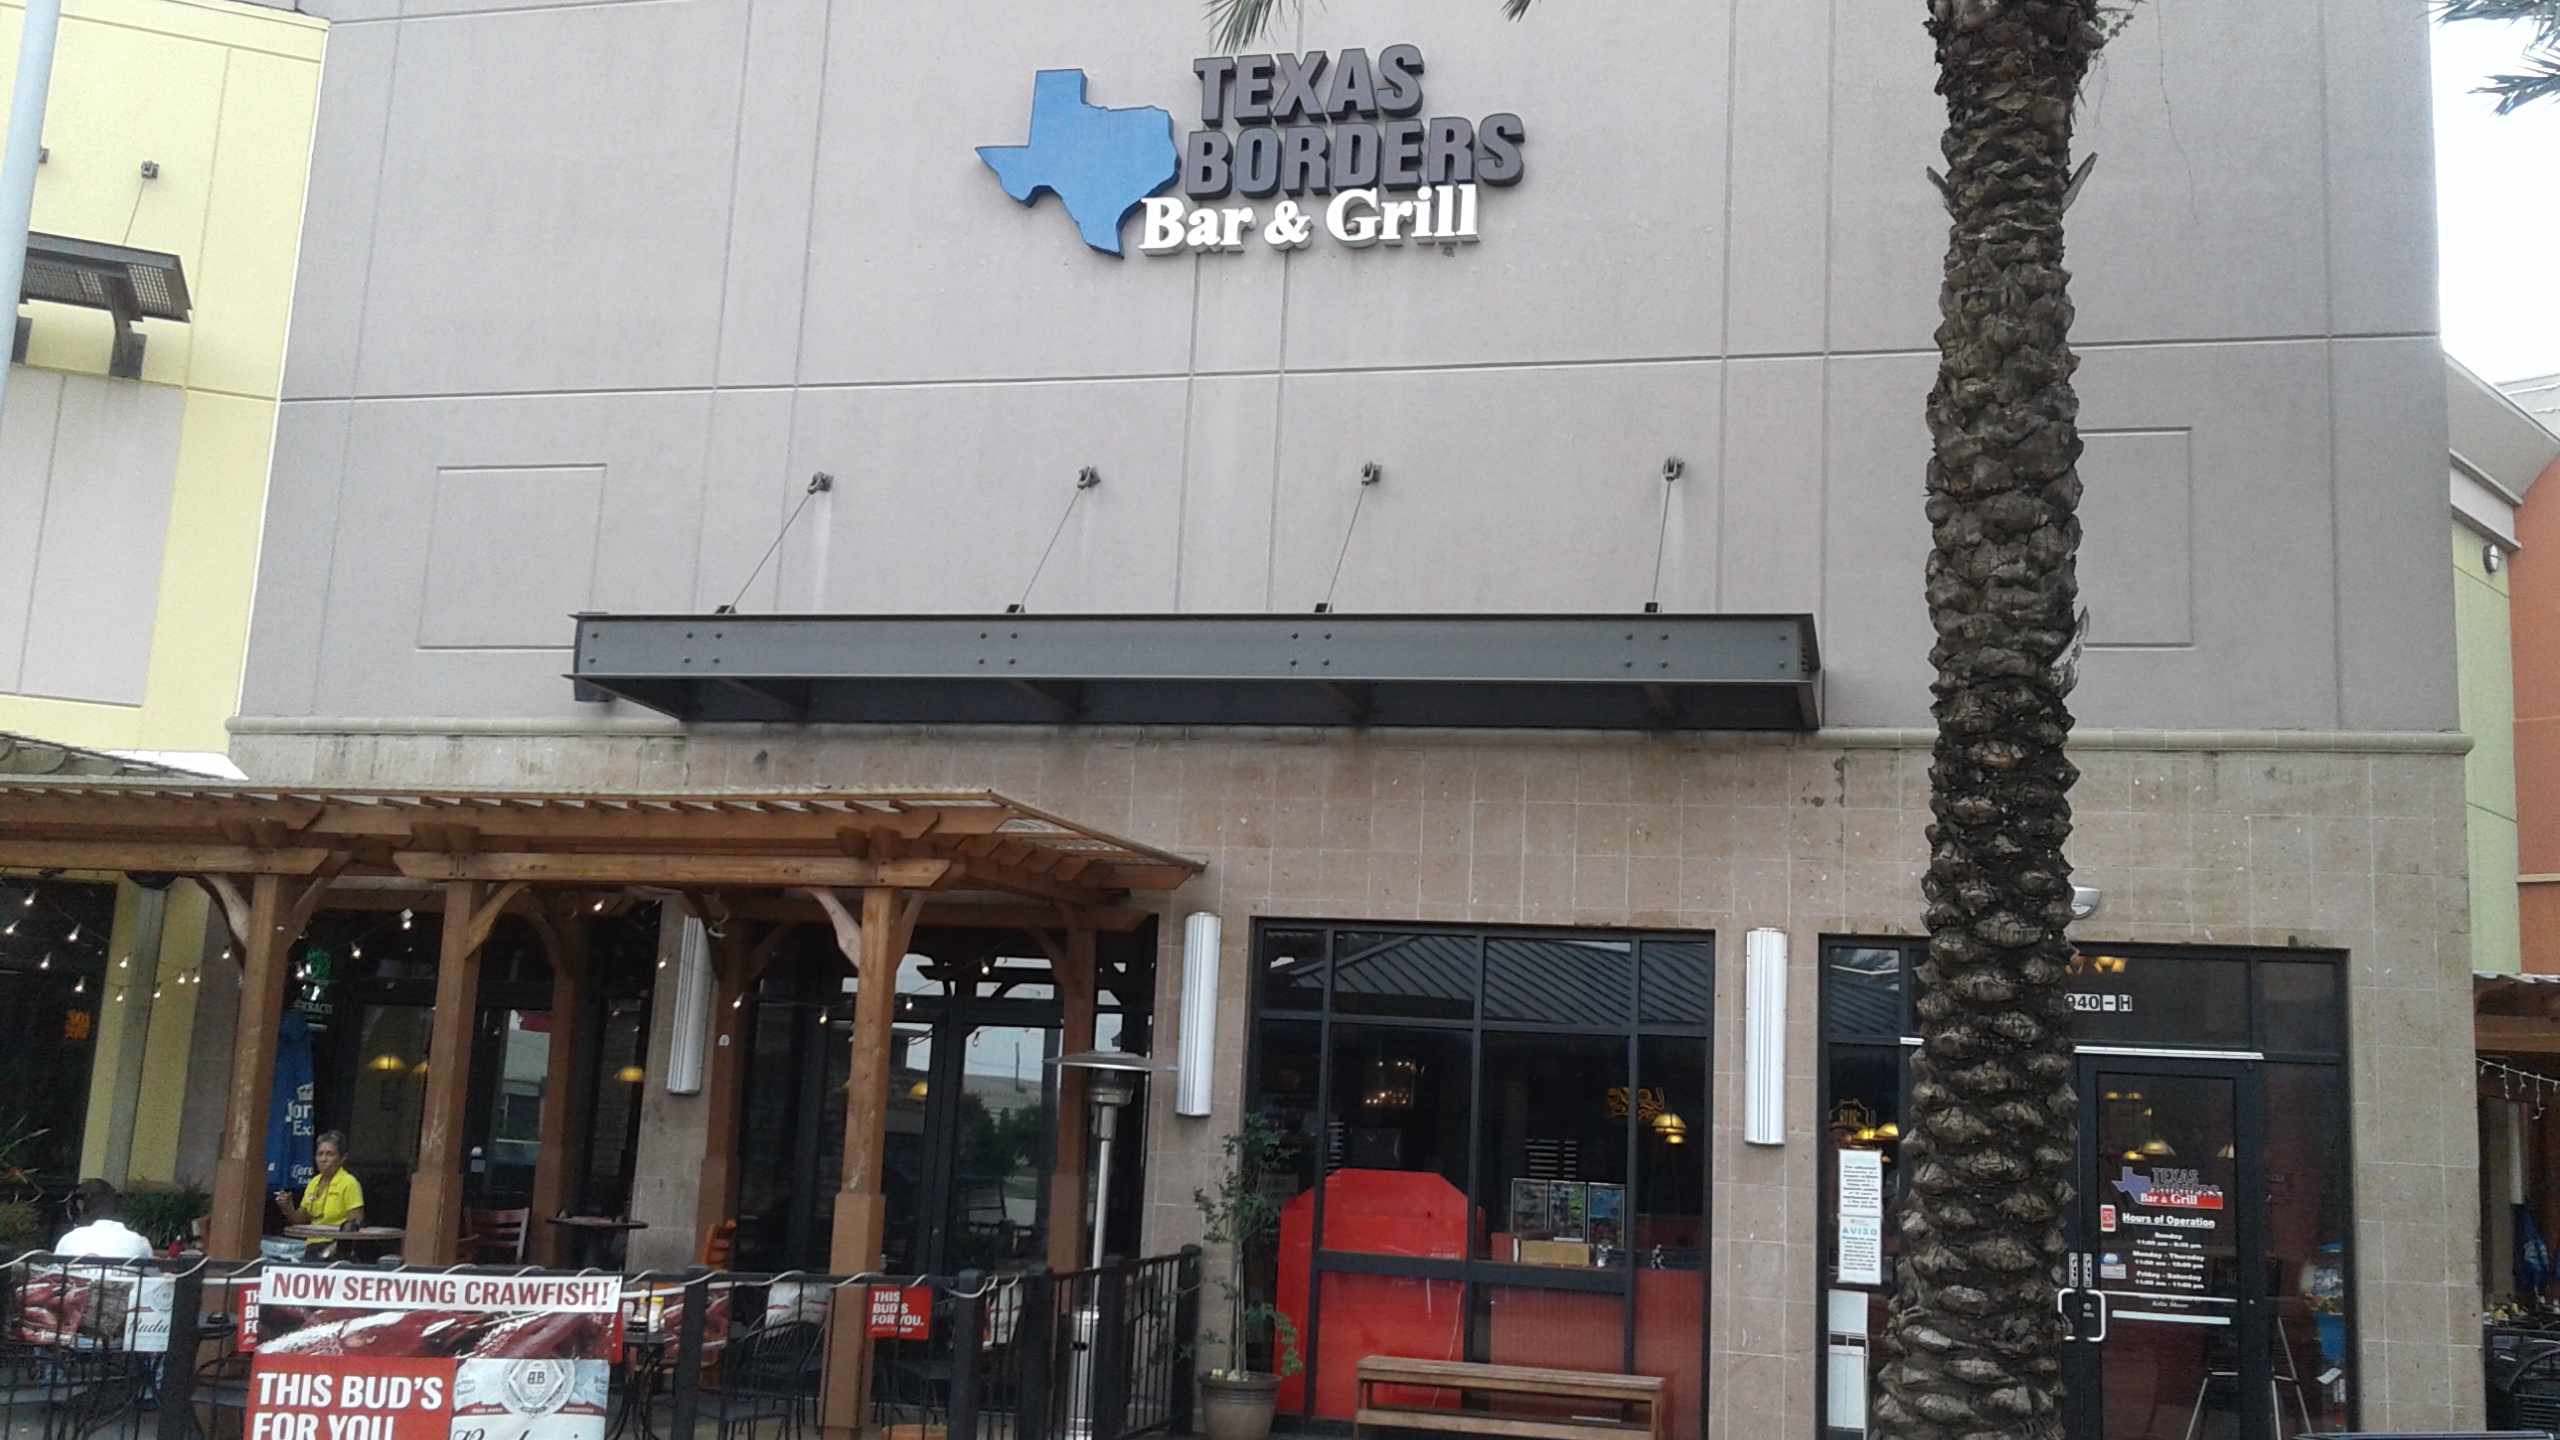 Texas Borders Bar & Grill Coupons near me in Katy | 8coupons